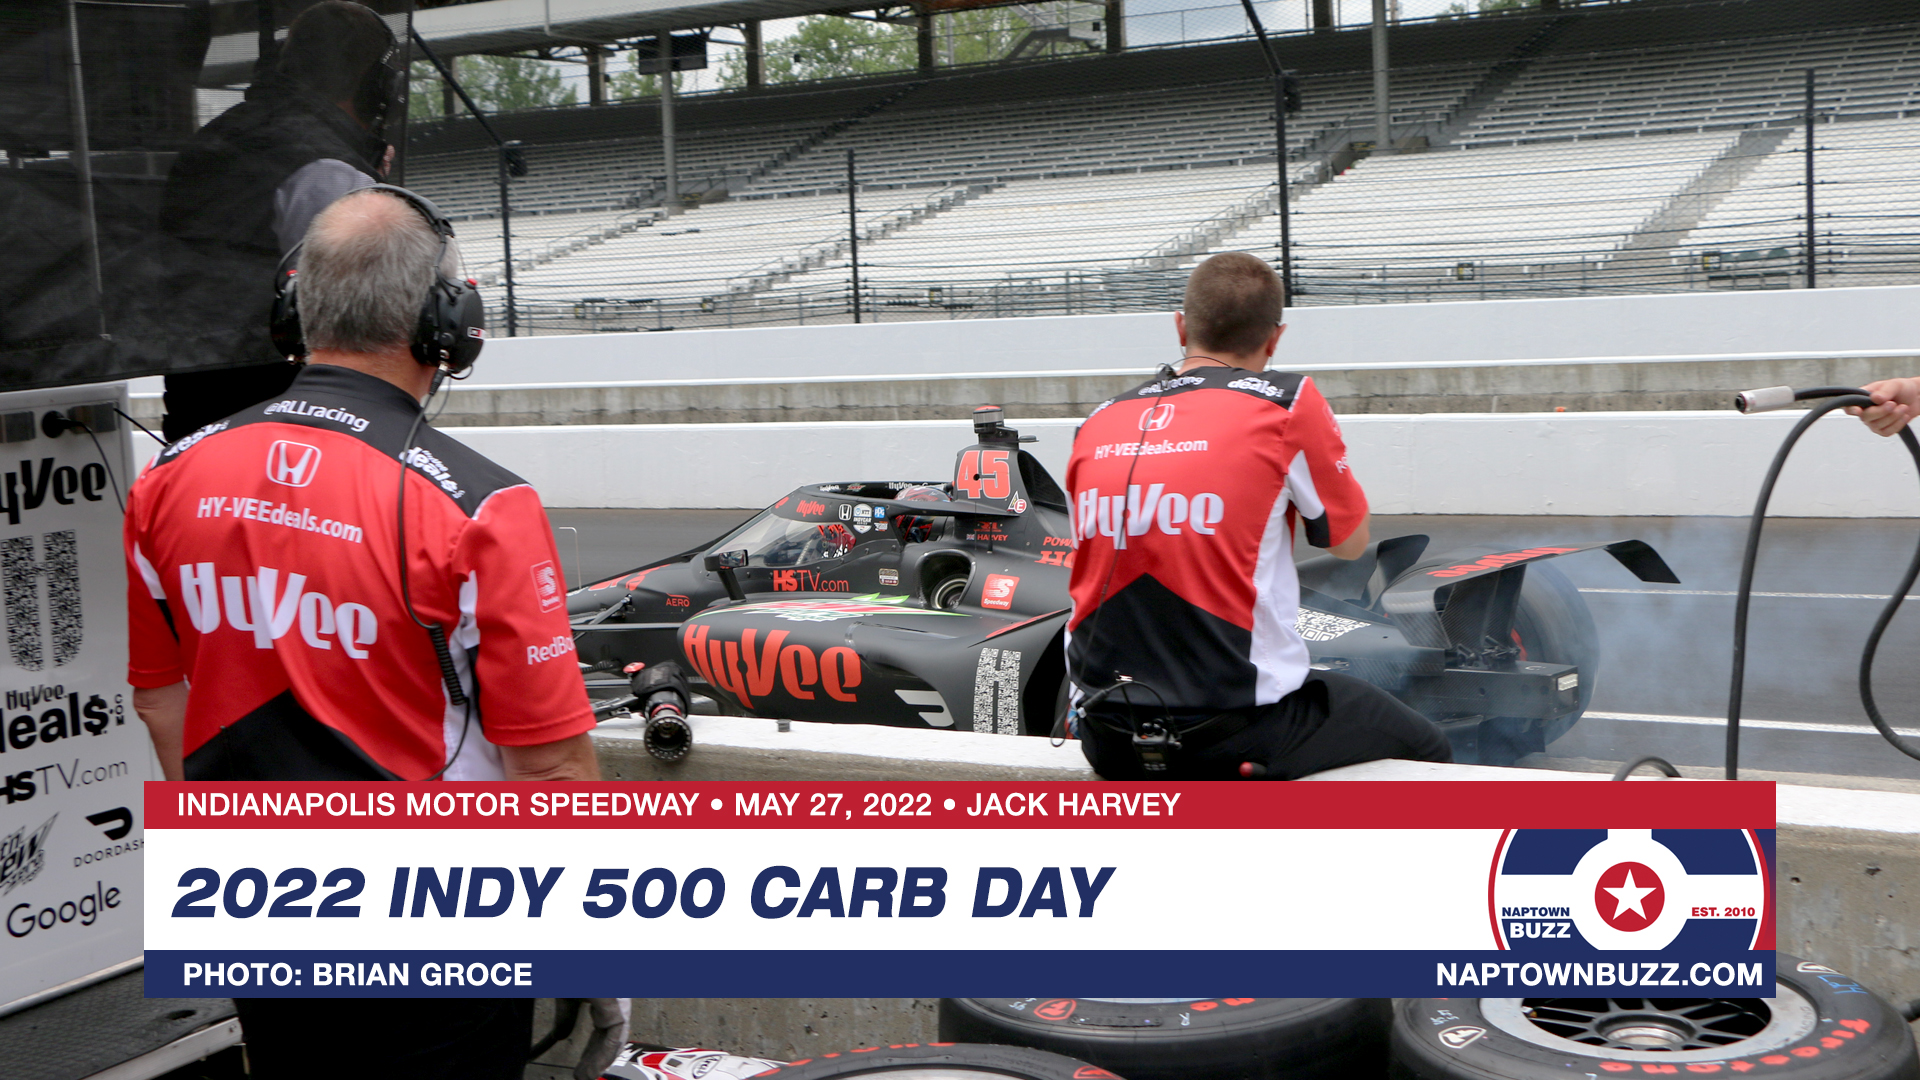 Indy 500 Carb Day May 27, 2022 Jack Harvey